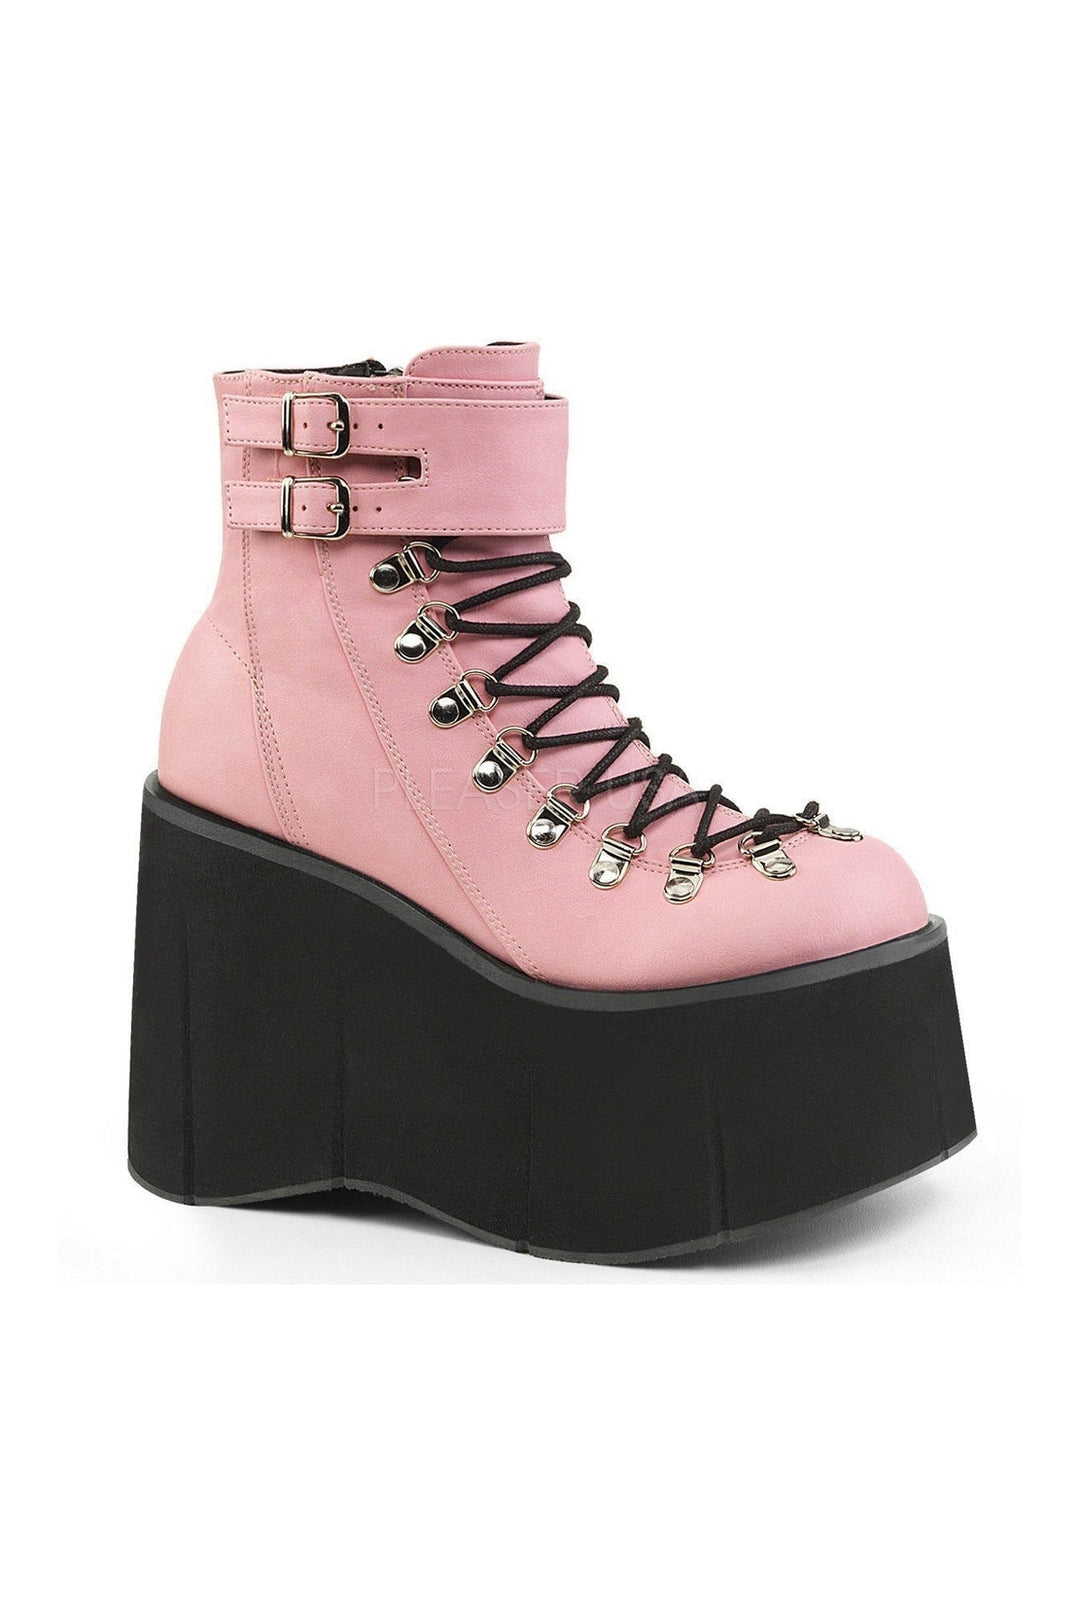 KERA-21 Demonia Ankle Boot | Pink Faux Leather-Demonia-Pink-Ankle Boots-SEXYSHOES.COM